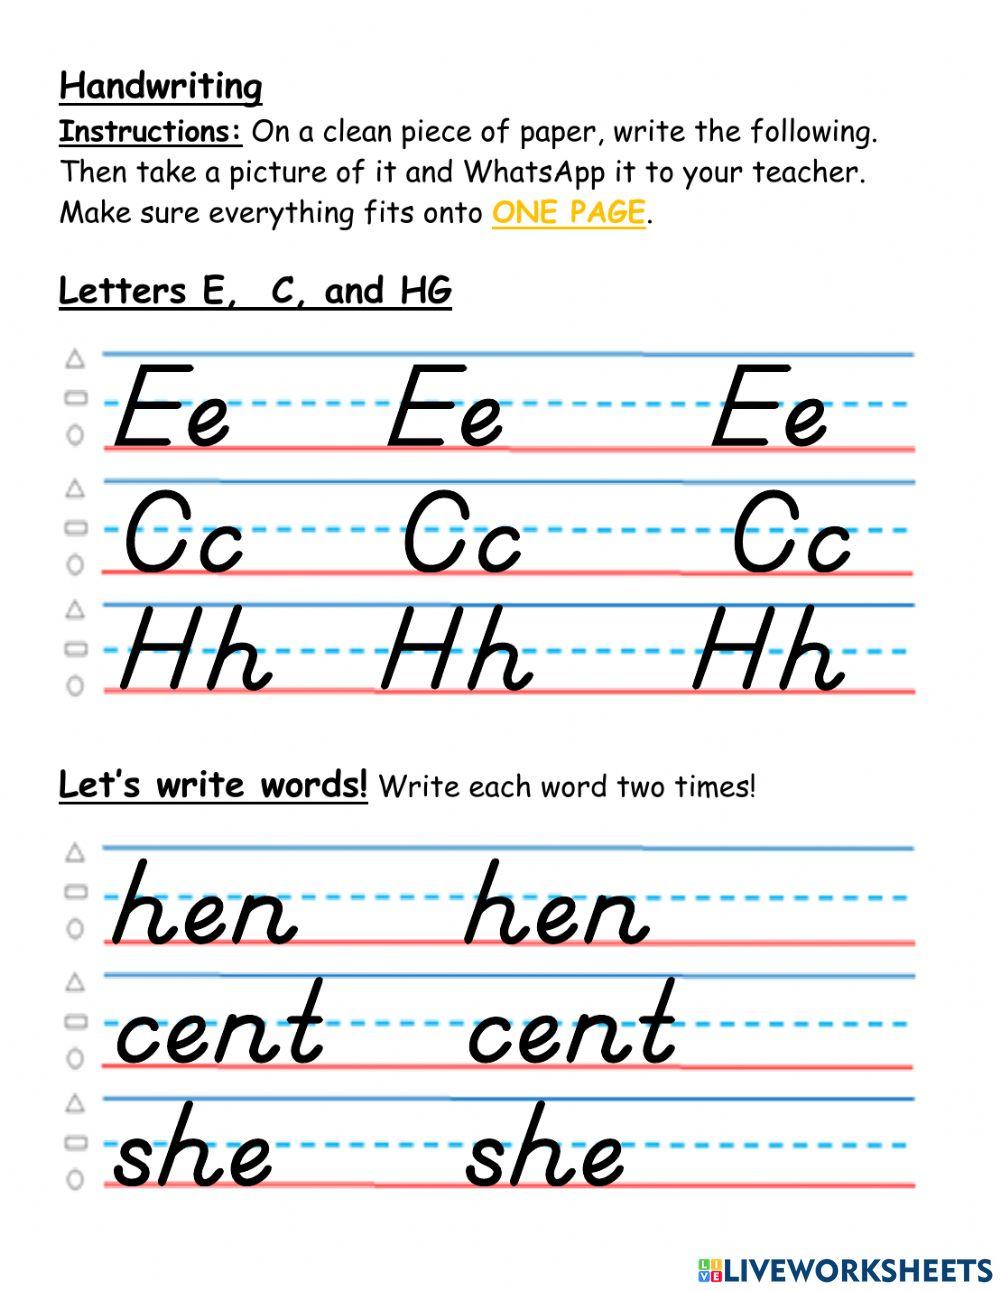 Writing Letters E, C, and H